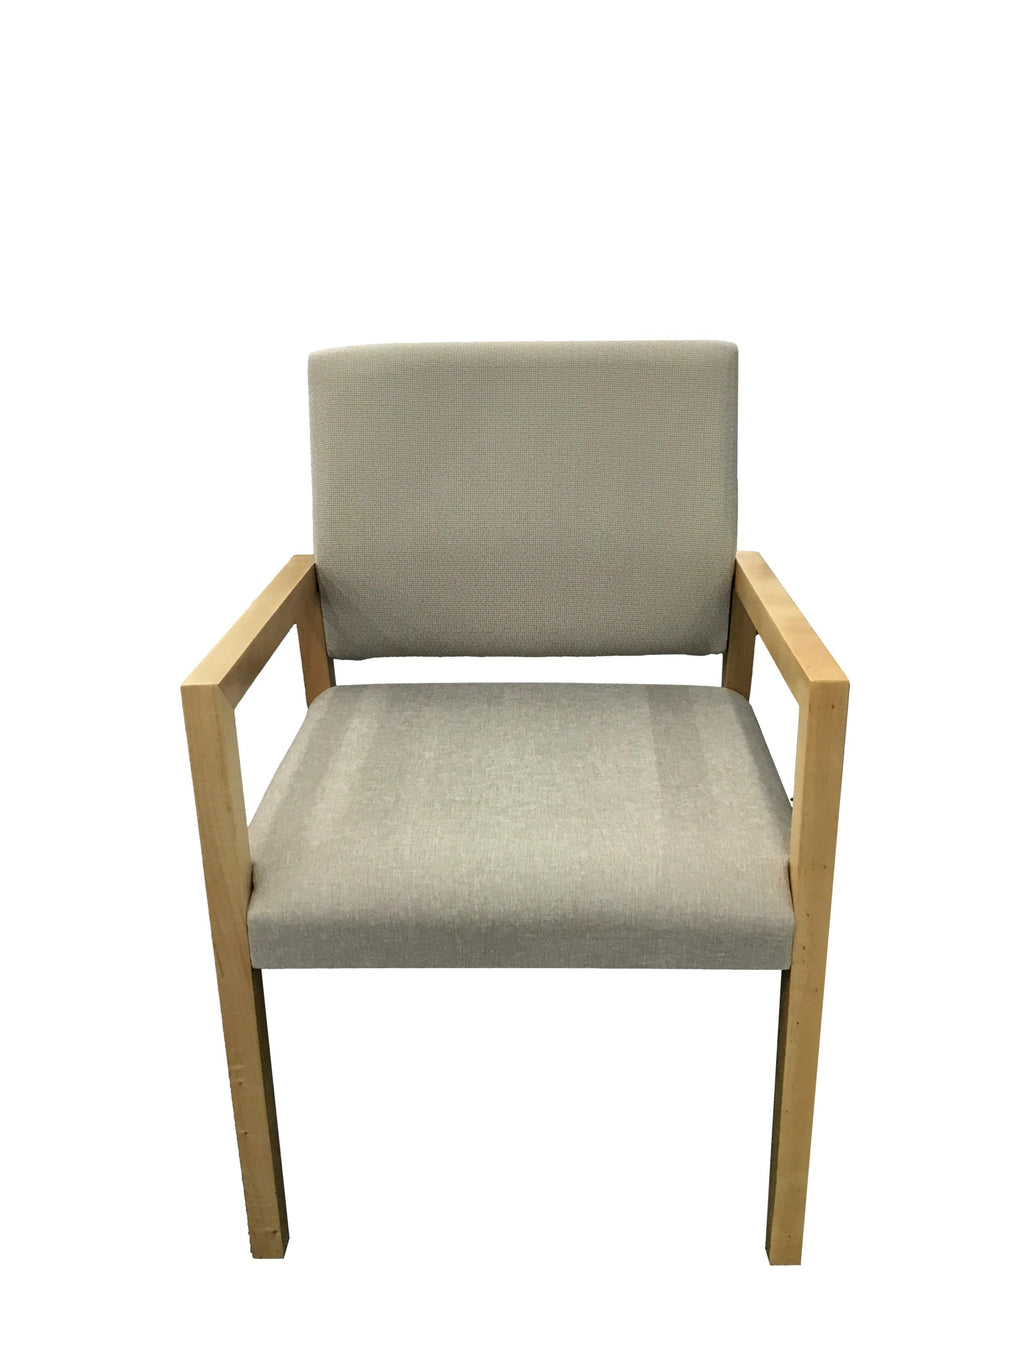 SALE New Lesro Guest Chair - Brooklyn Collection - HALF PRICE